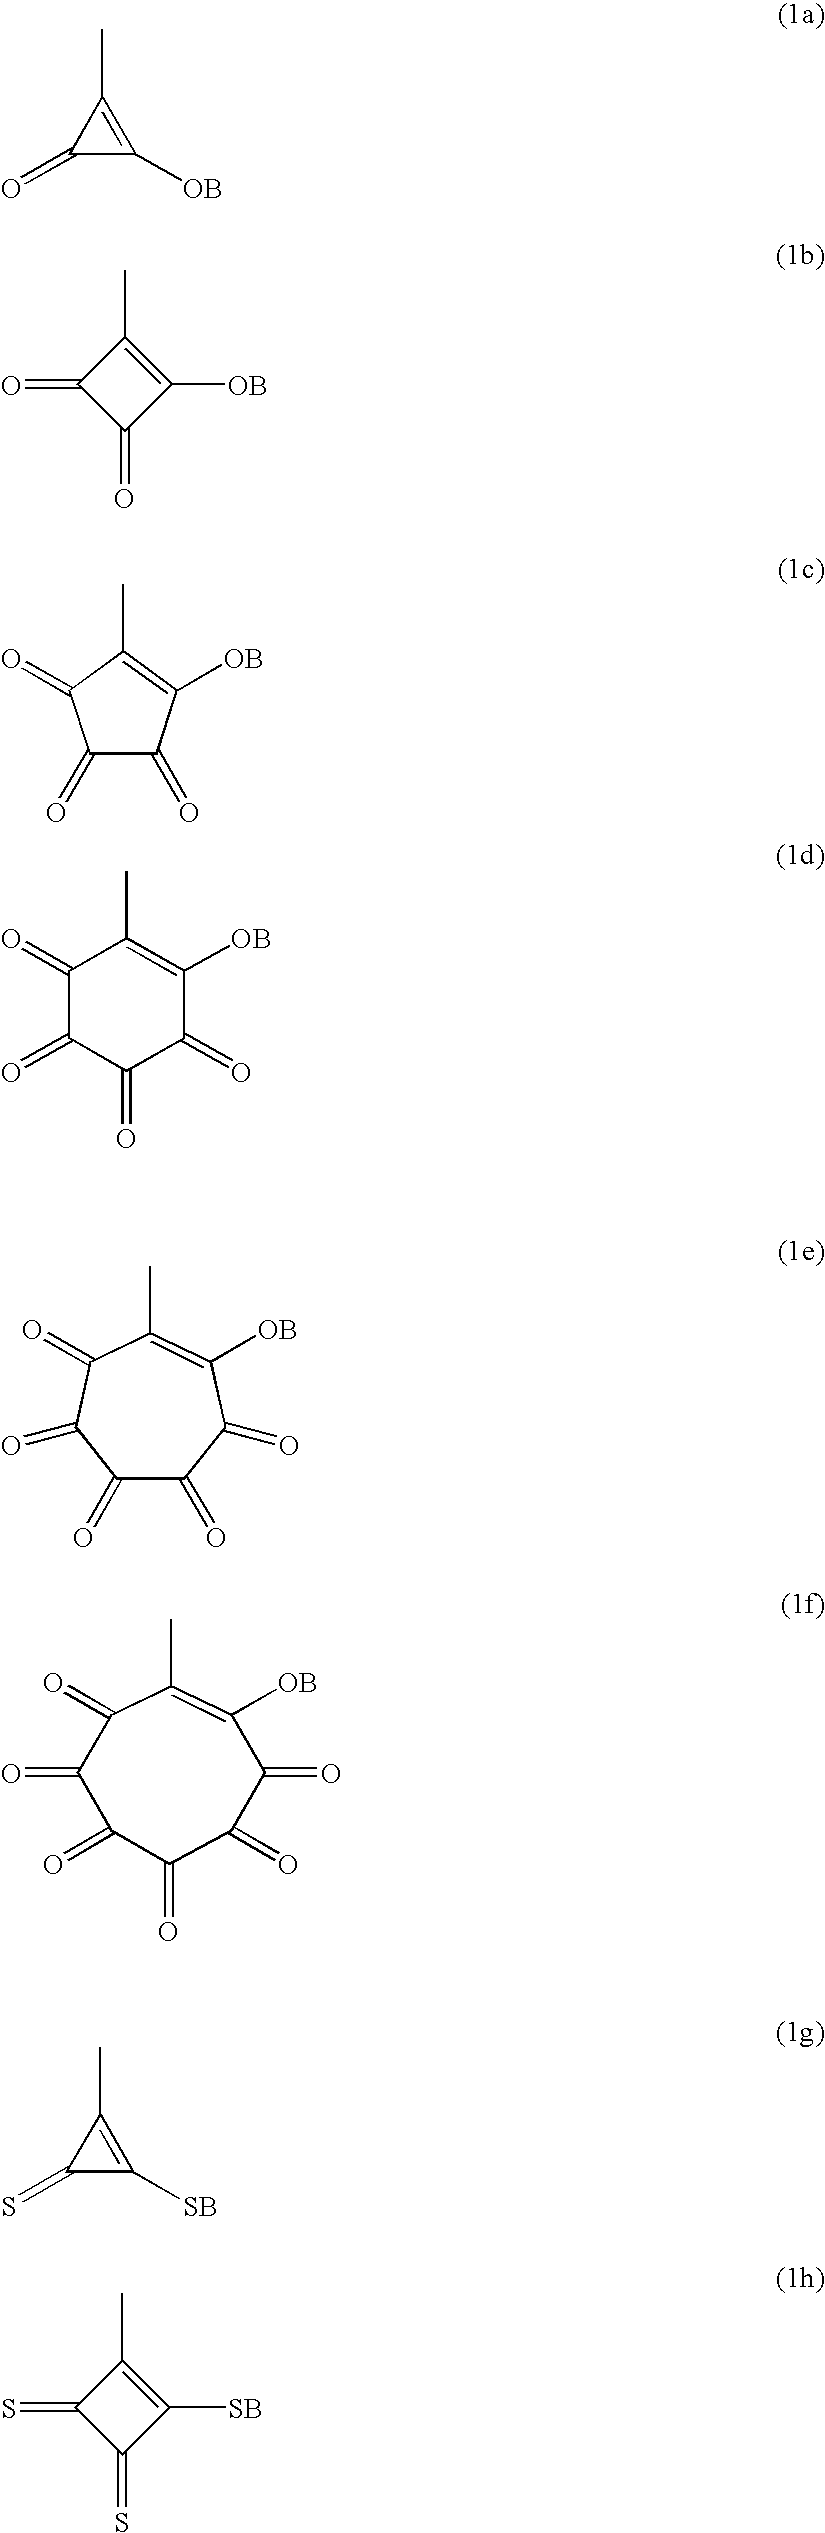 Polymer having oxocarbon group, and use thereof